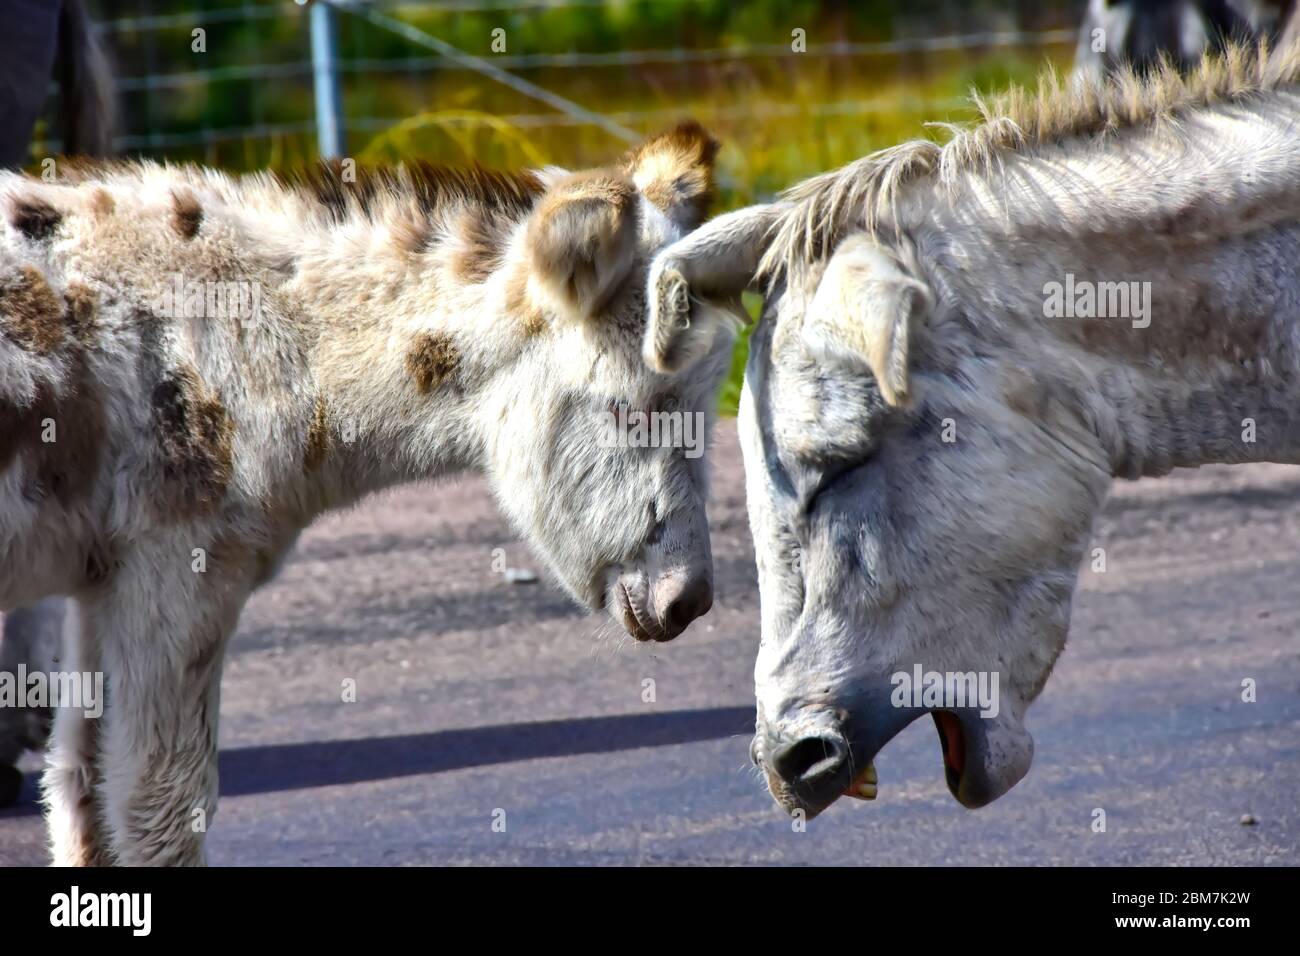 Mother and baby burro having a talk. Stock Photo